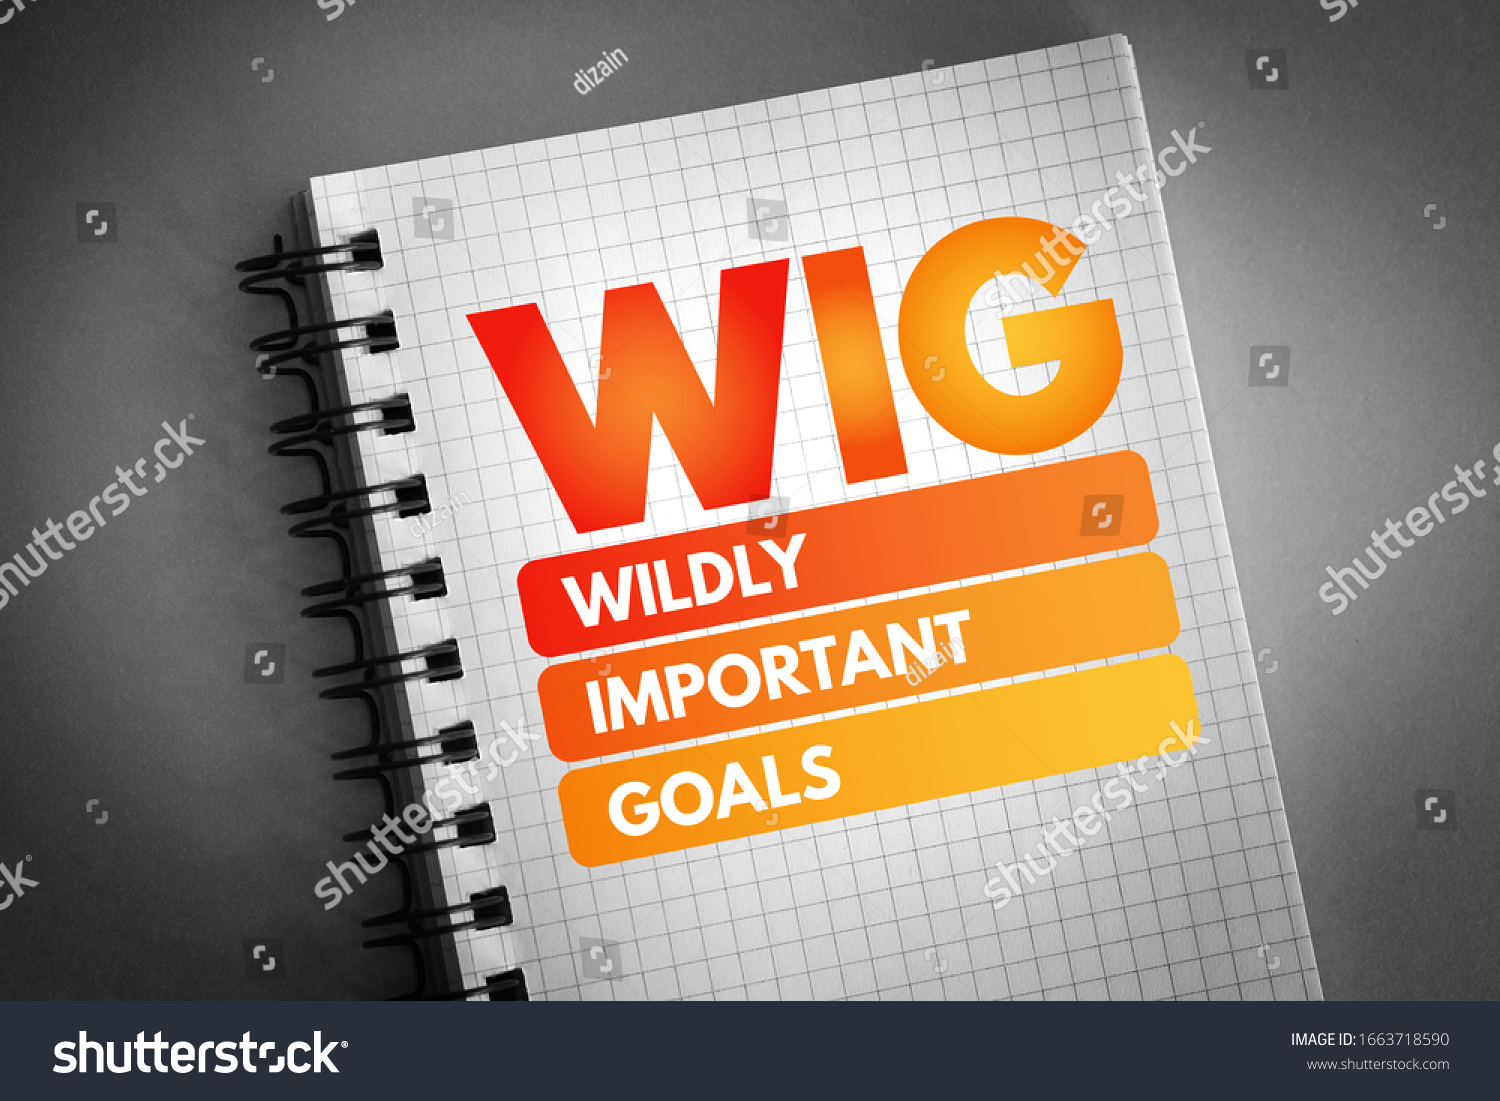 Wig Wildly Important Goals Acronym Business Stock Photo Edit Now